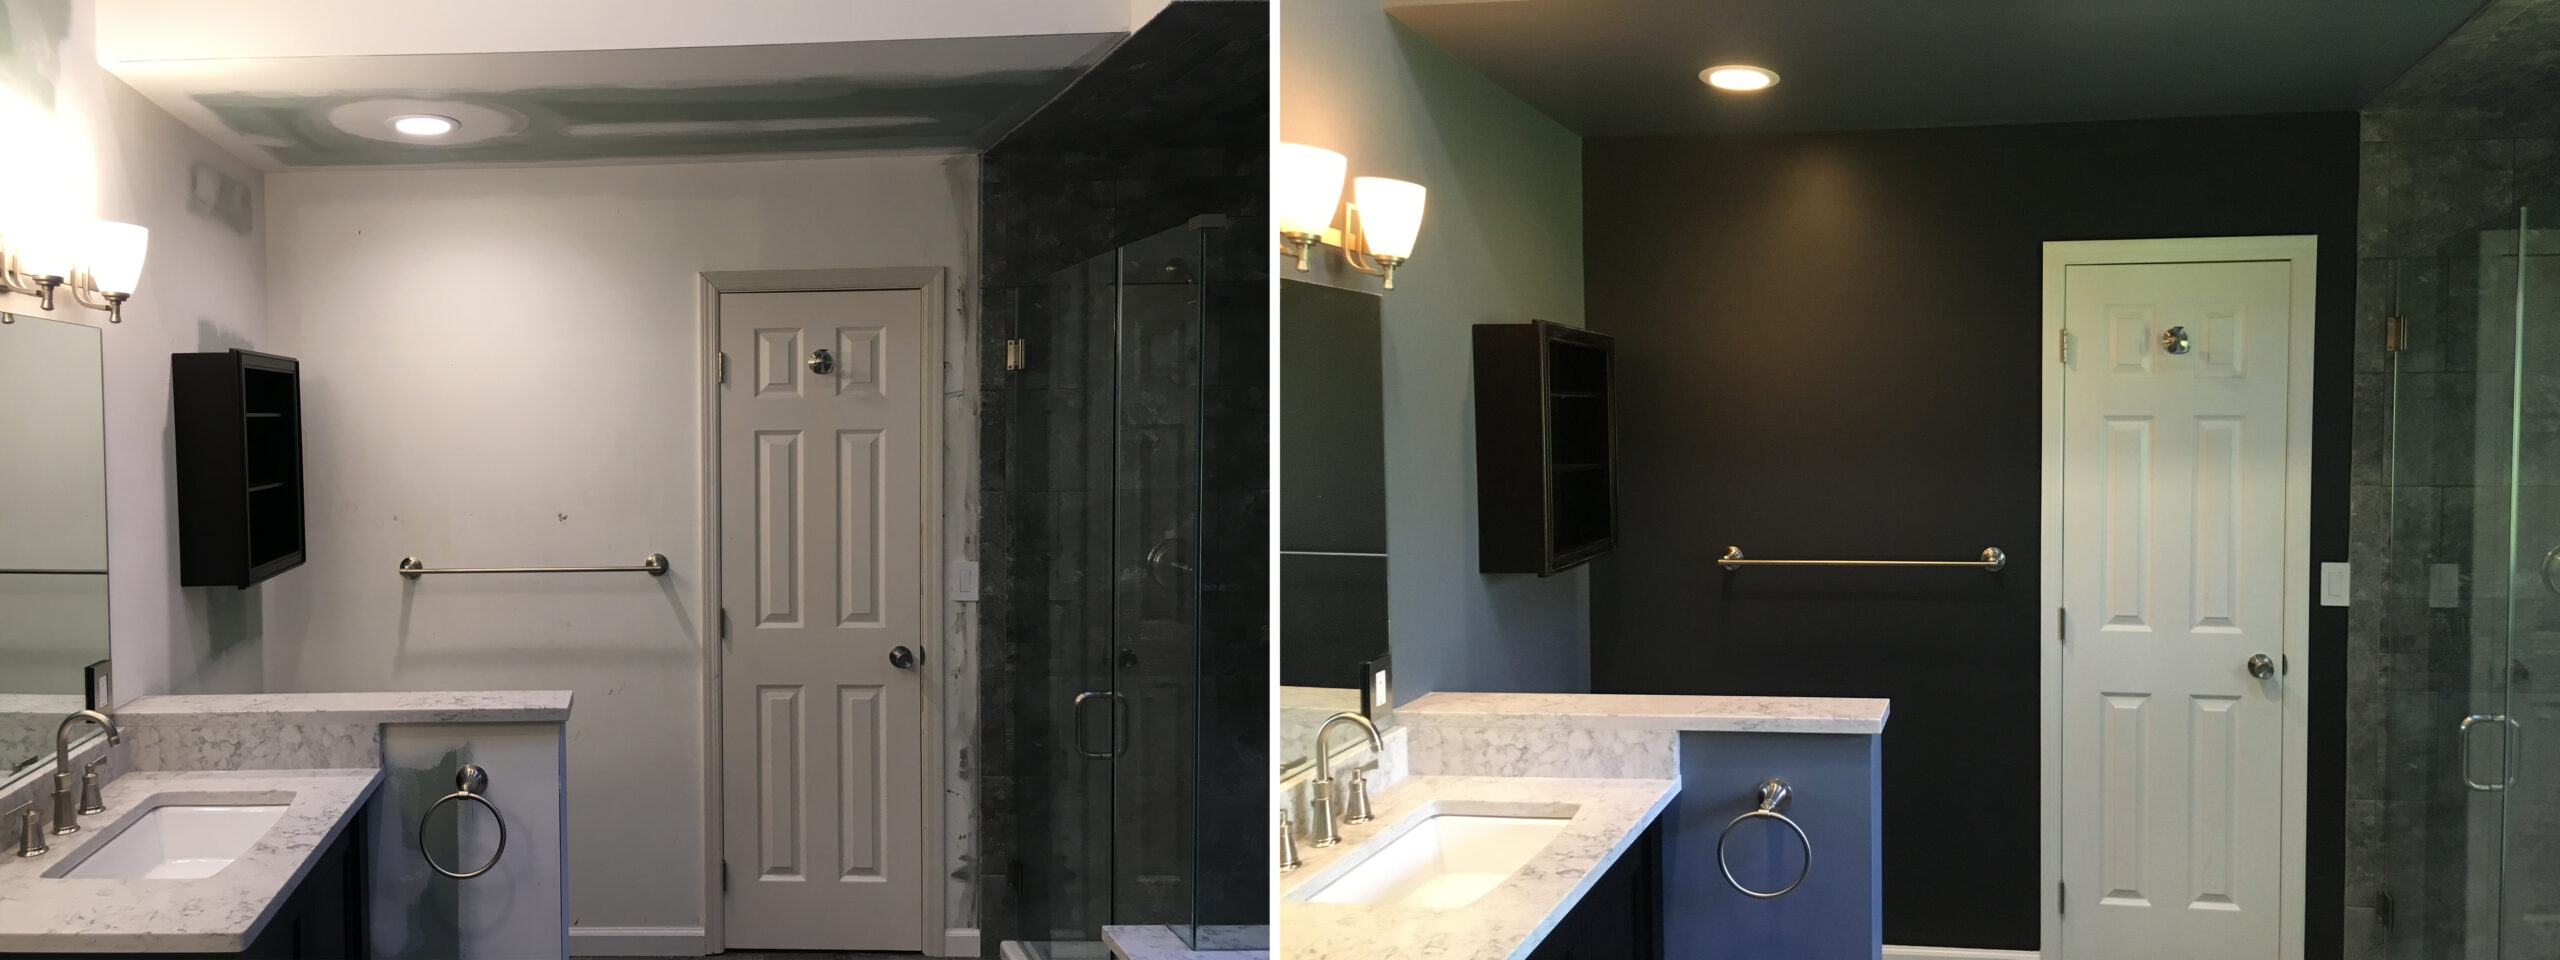 Interior Bathroom Painting Before and After